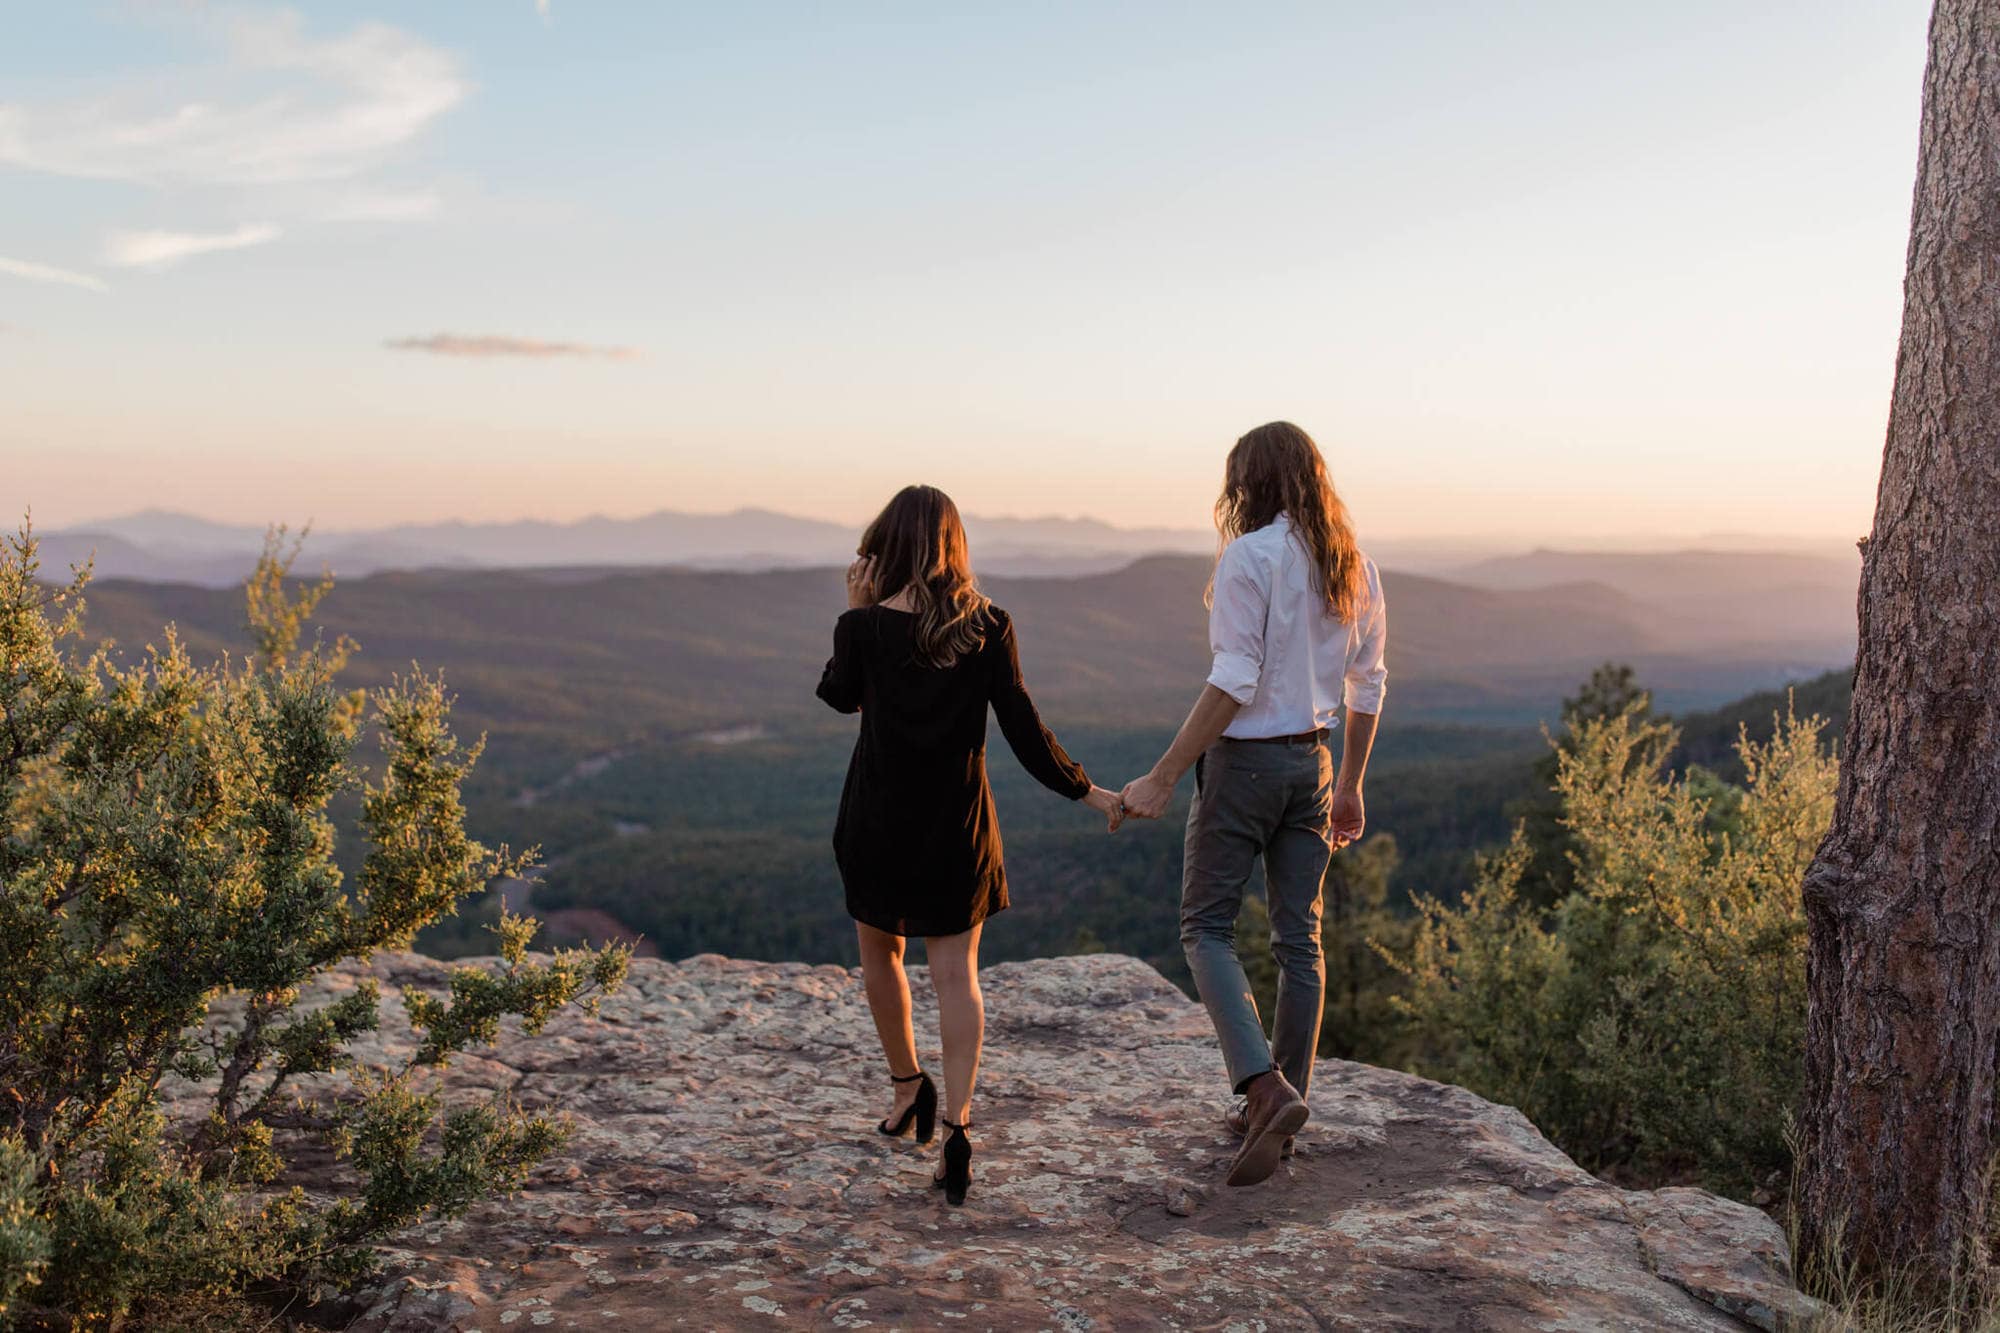 Hand in hand, the couple walks to the edge of the Mogollon rim during their adventurous engagement photo session.